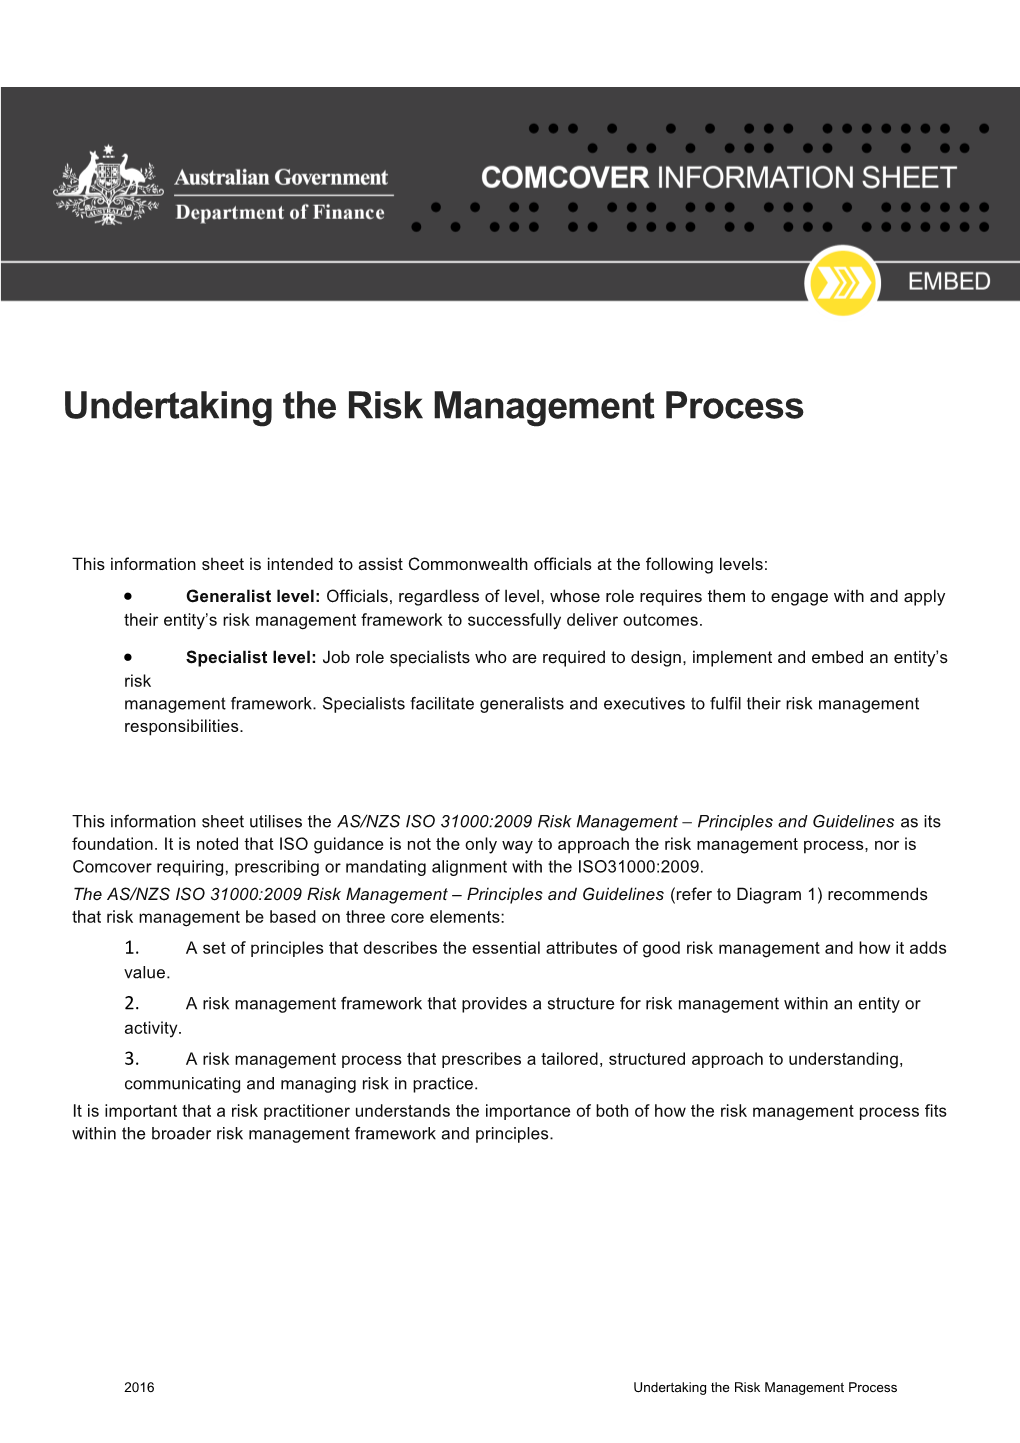 Undertaking the Risk Management Process